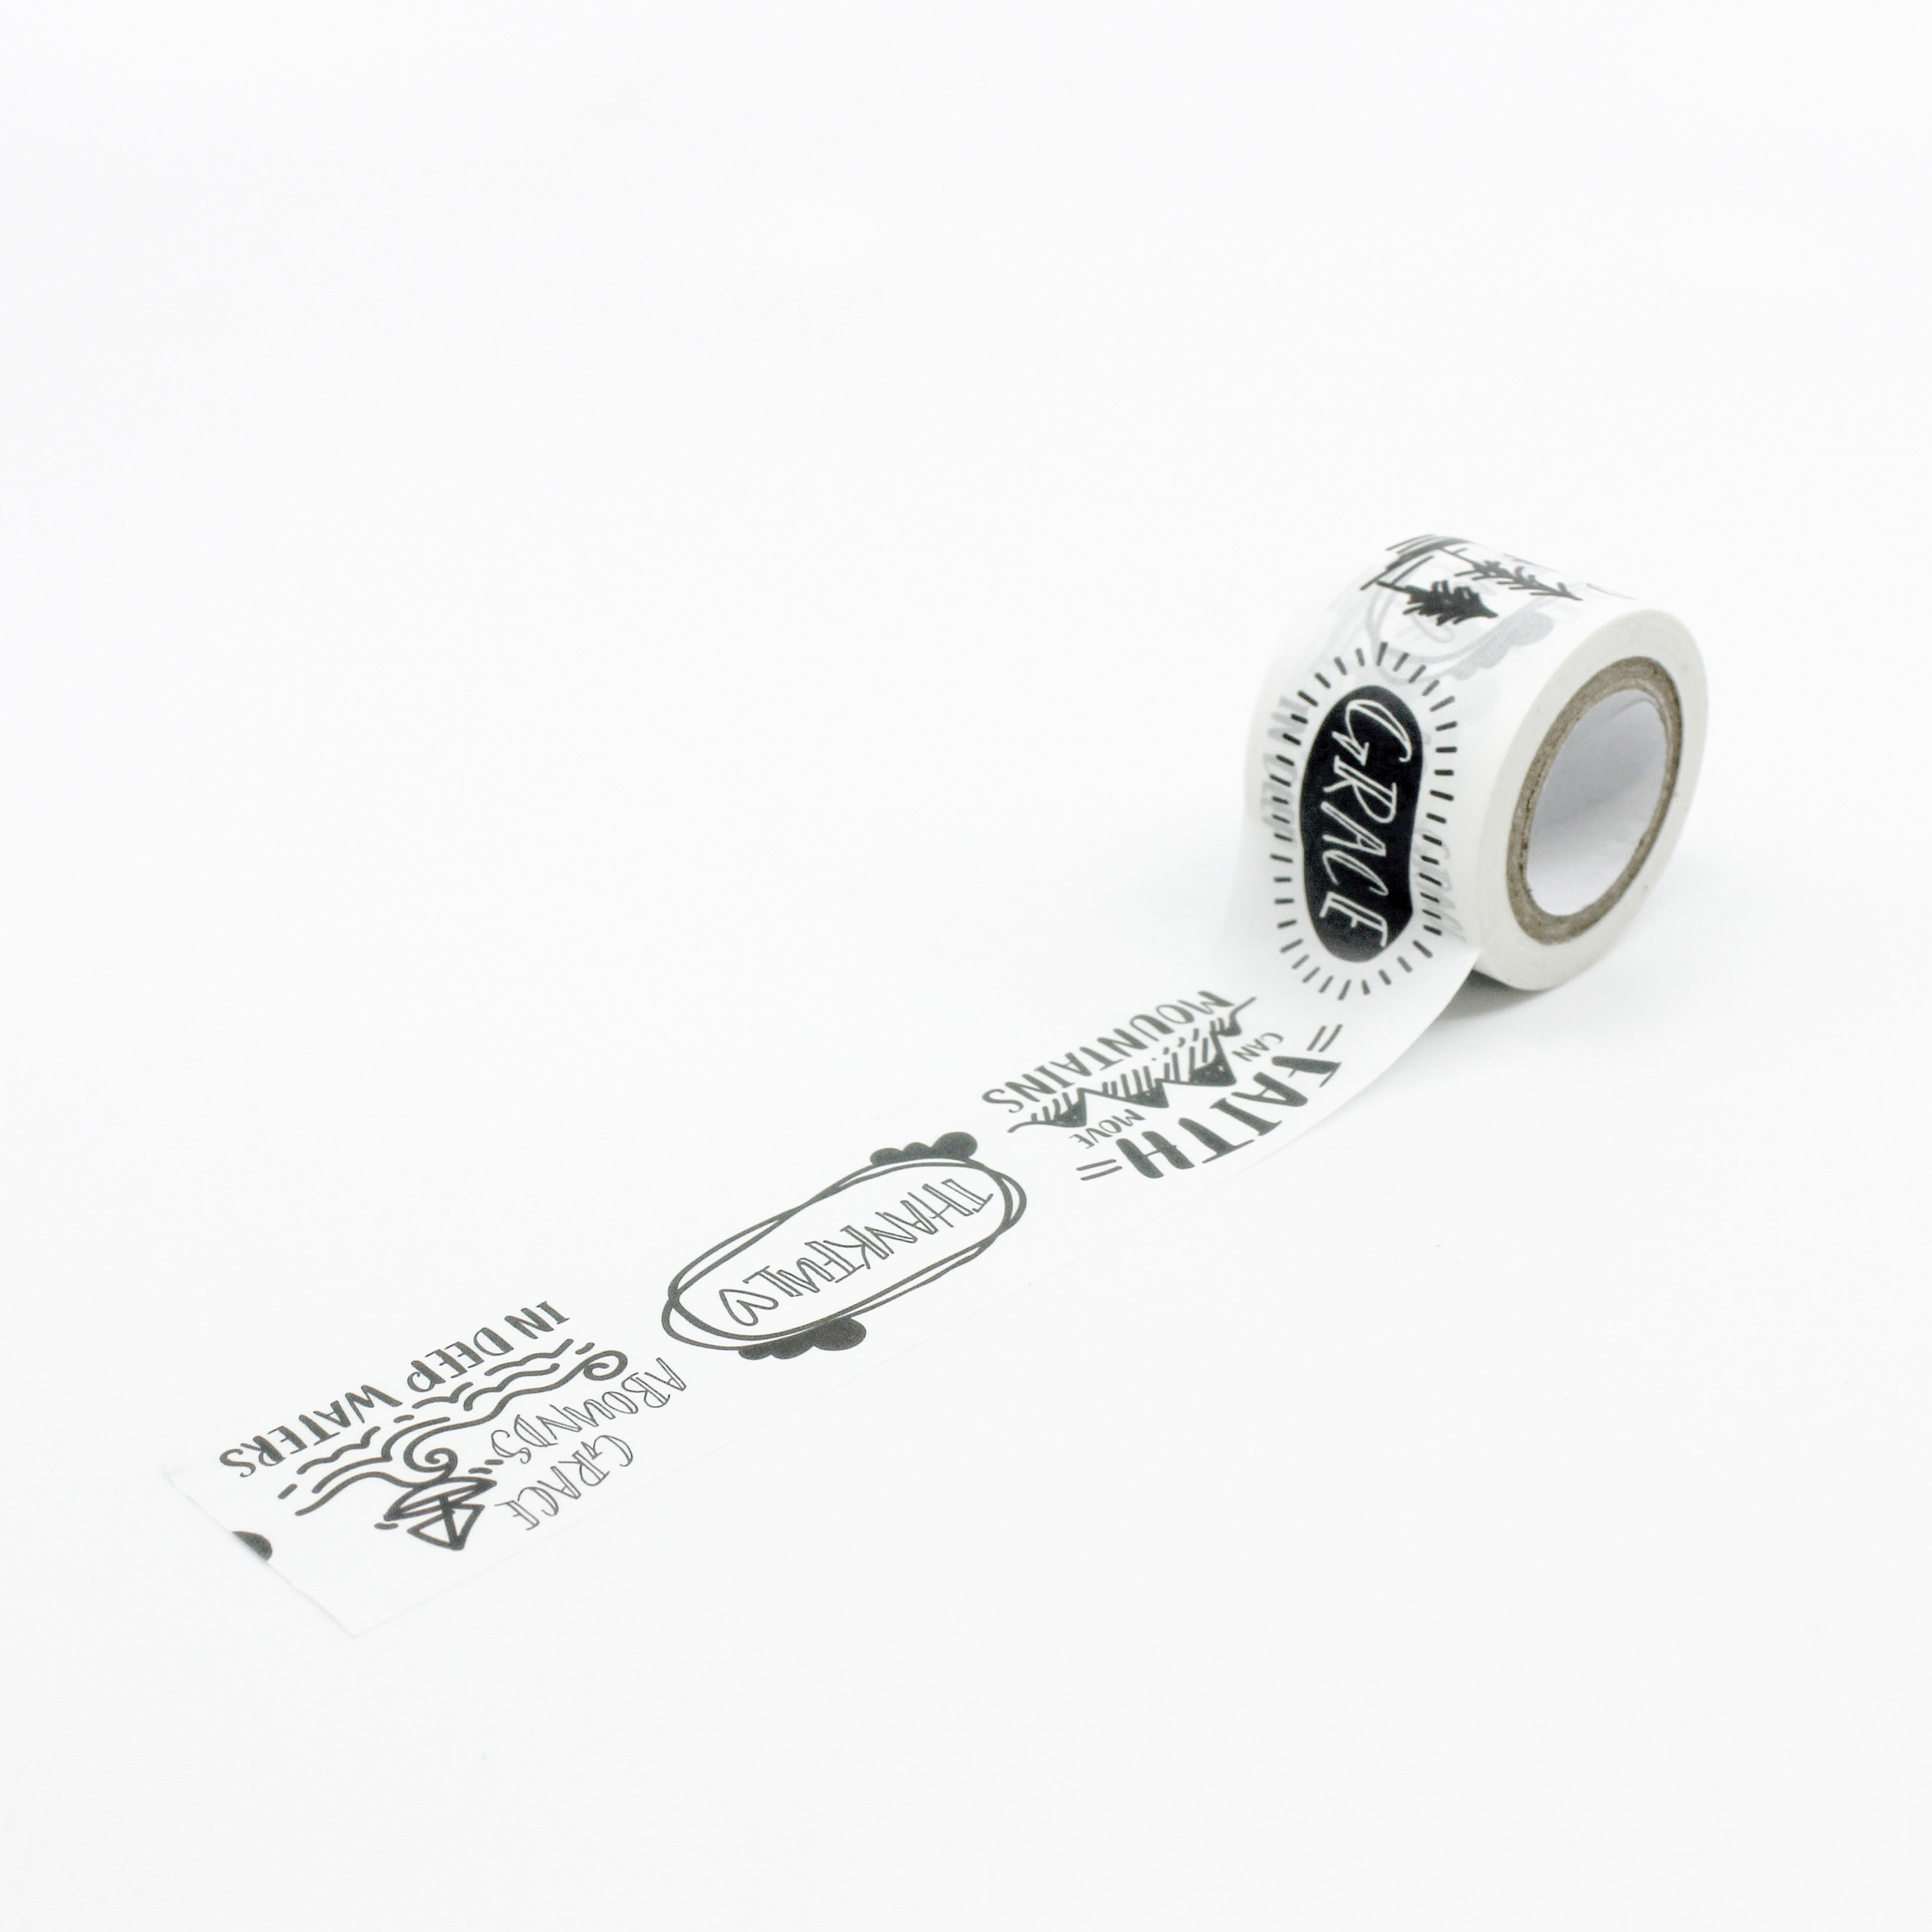 Celebrate your unwavering faith with our affirmation washi tape ideal for adding a profound and motivating touch to your crafts, embodying the essence of spiritual resilience. This tape is sold at BBB Supplies Craft Shop.